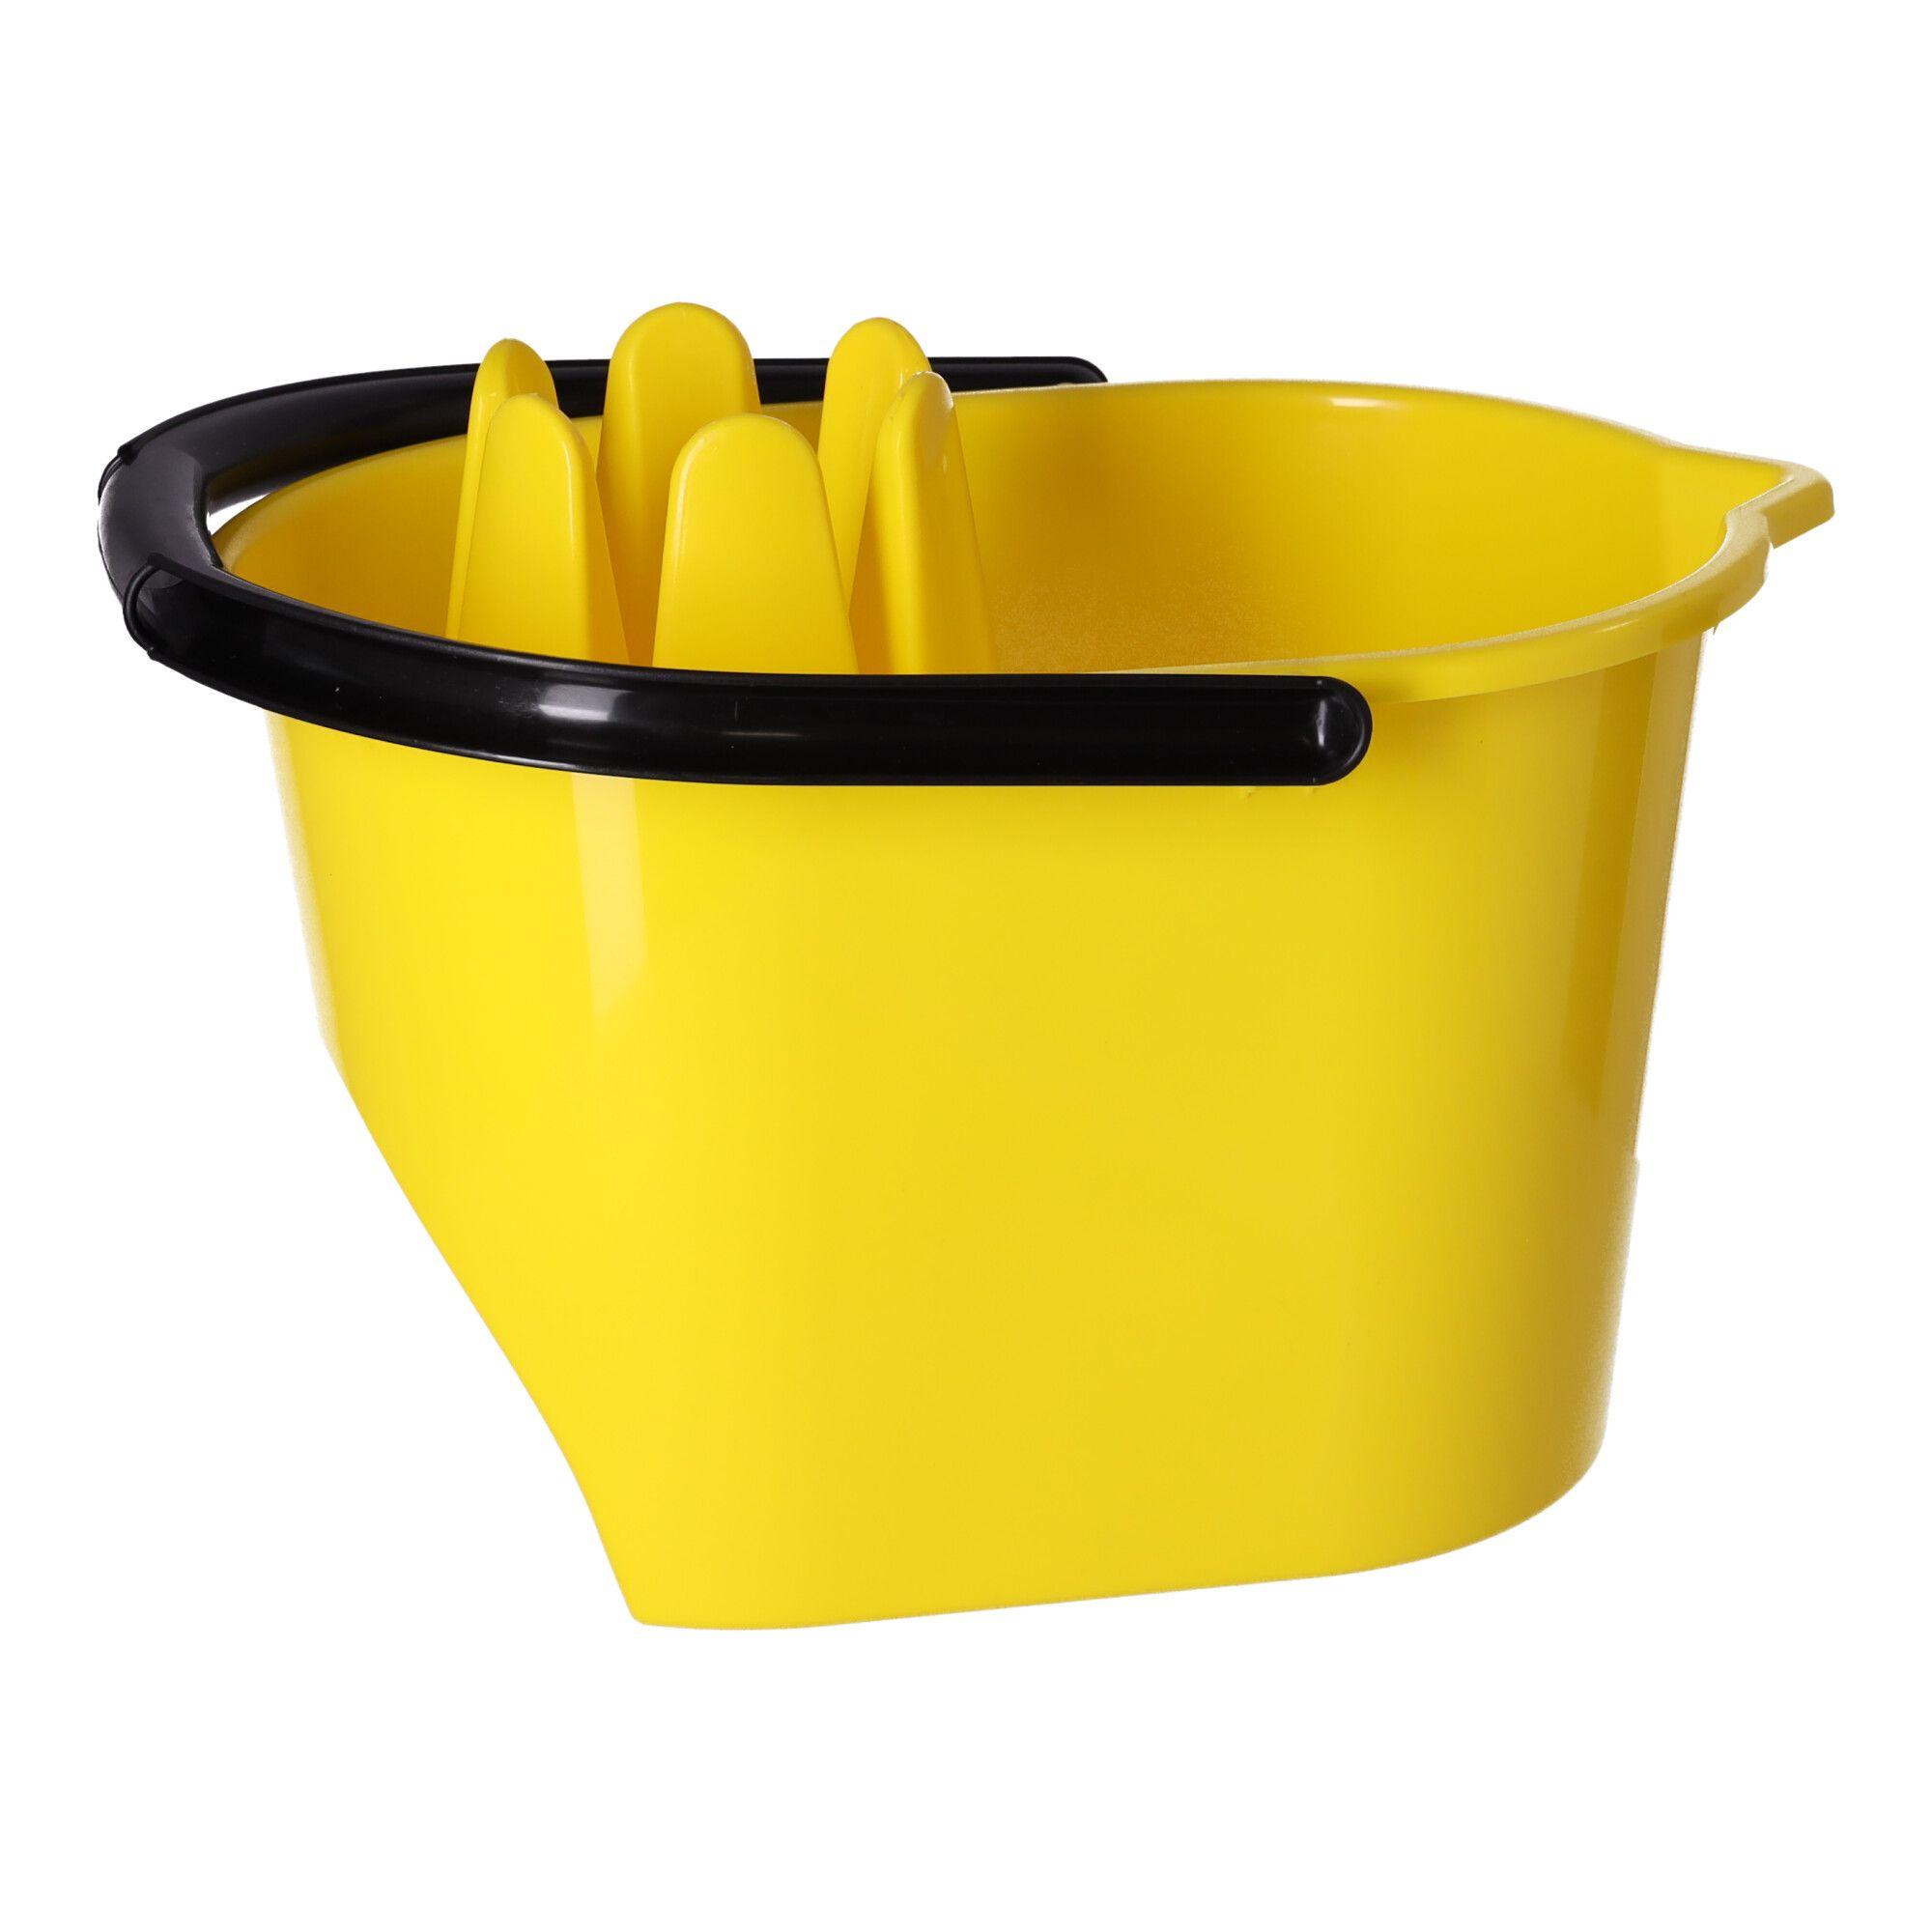 Mop bucket with squeezer, POLISH PRODUCT - yellow